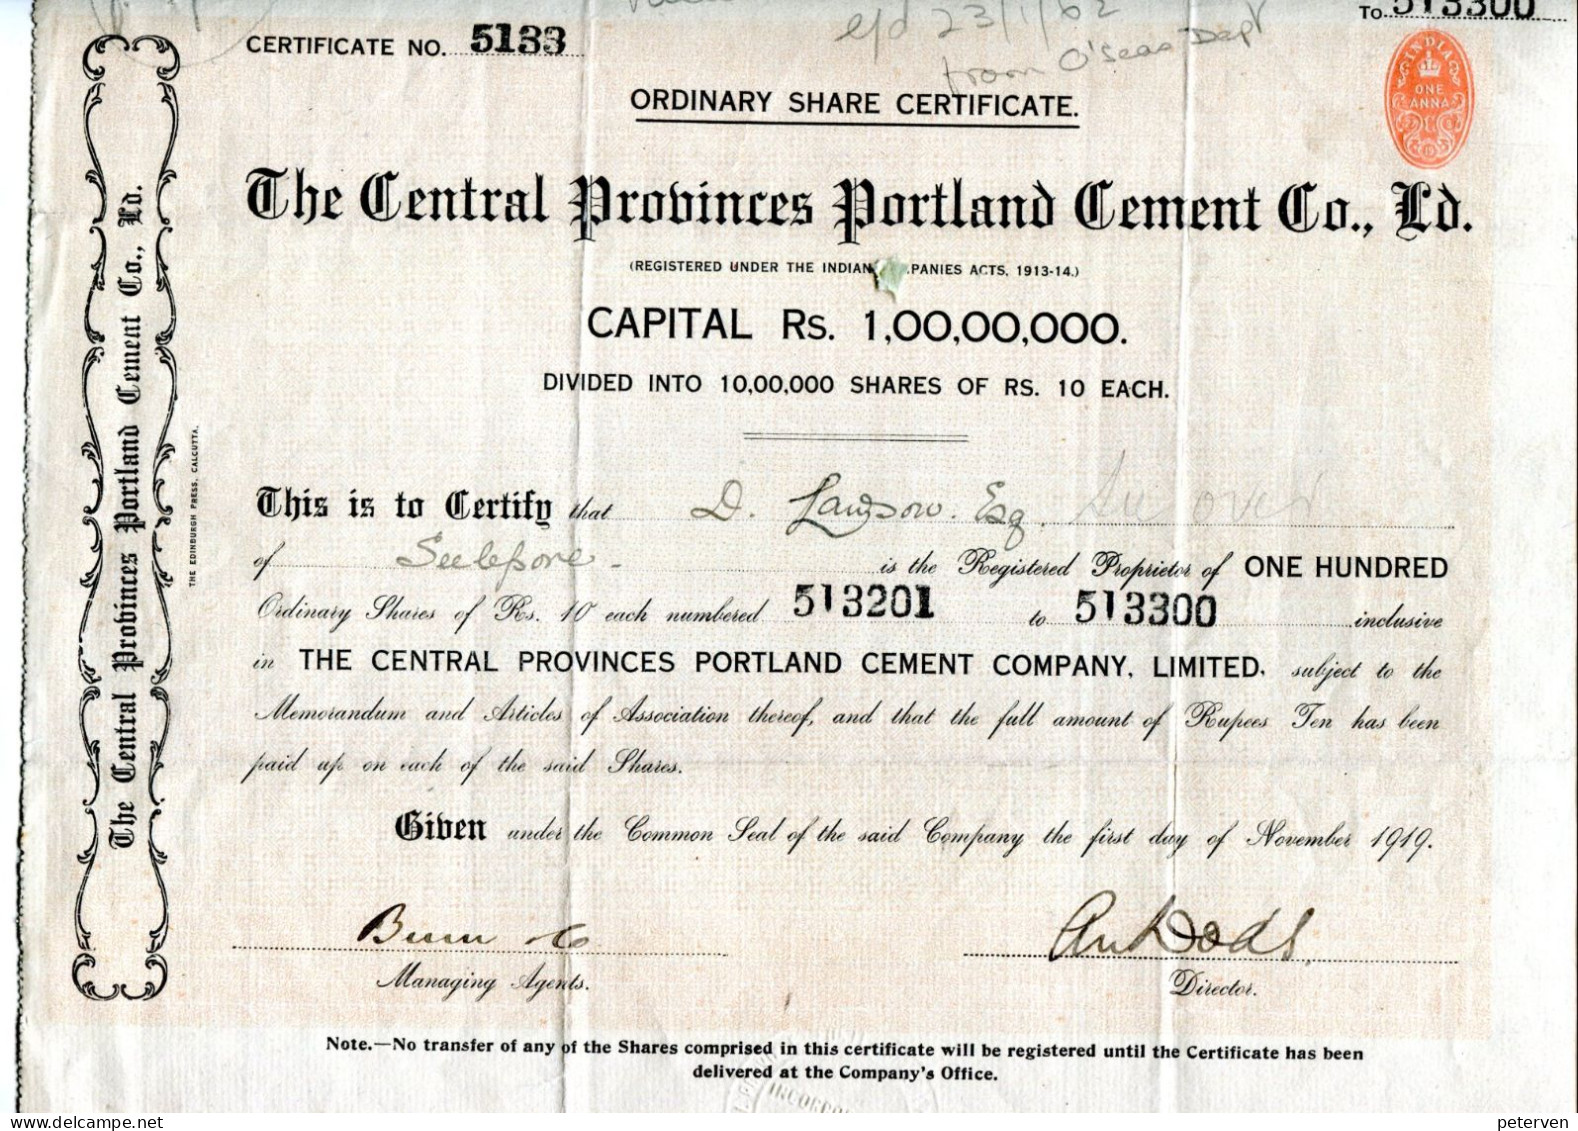 India: The CENTRAL PROVINCES PORTLAND CEMENT Company, Limited - Industry